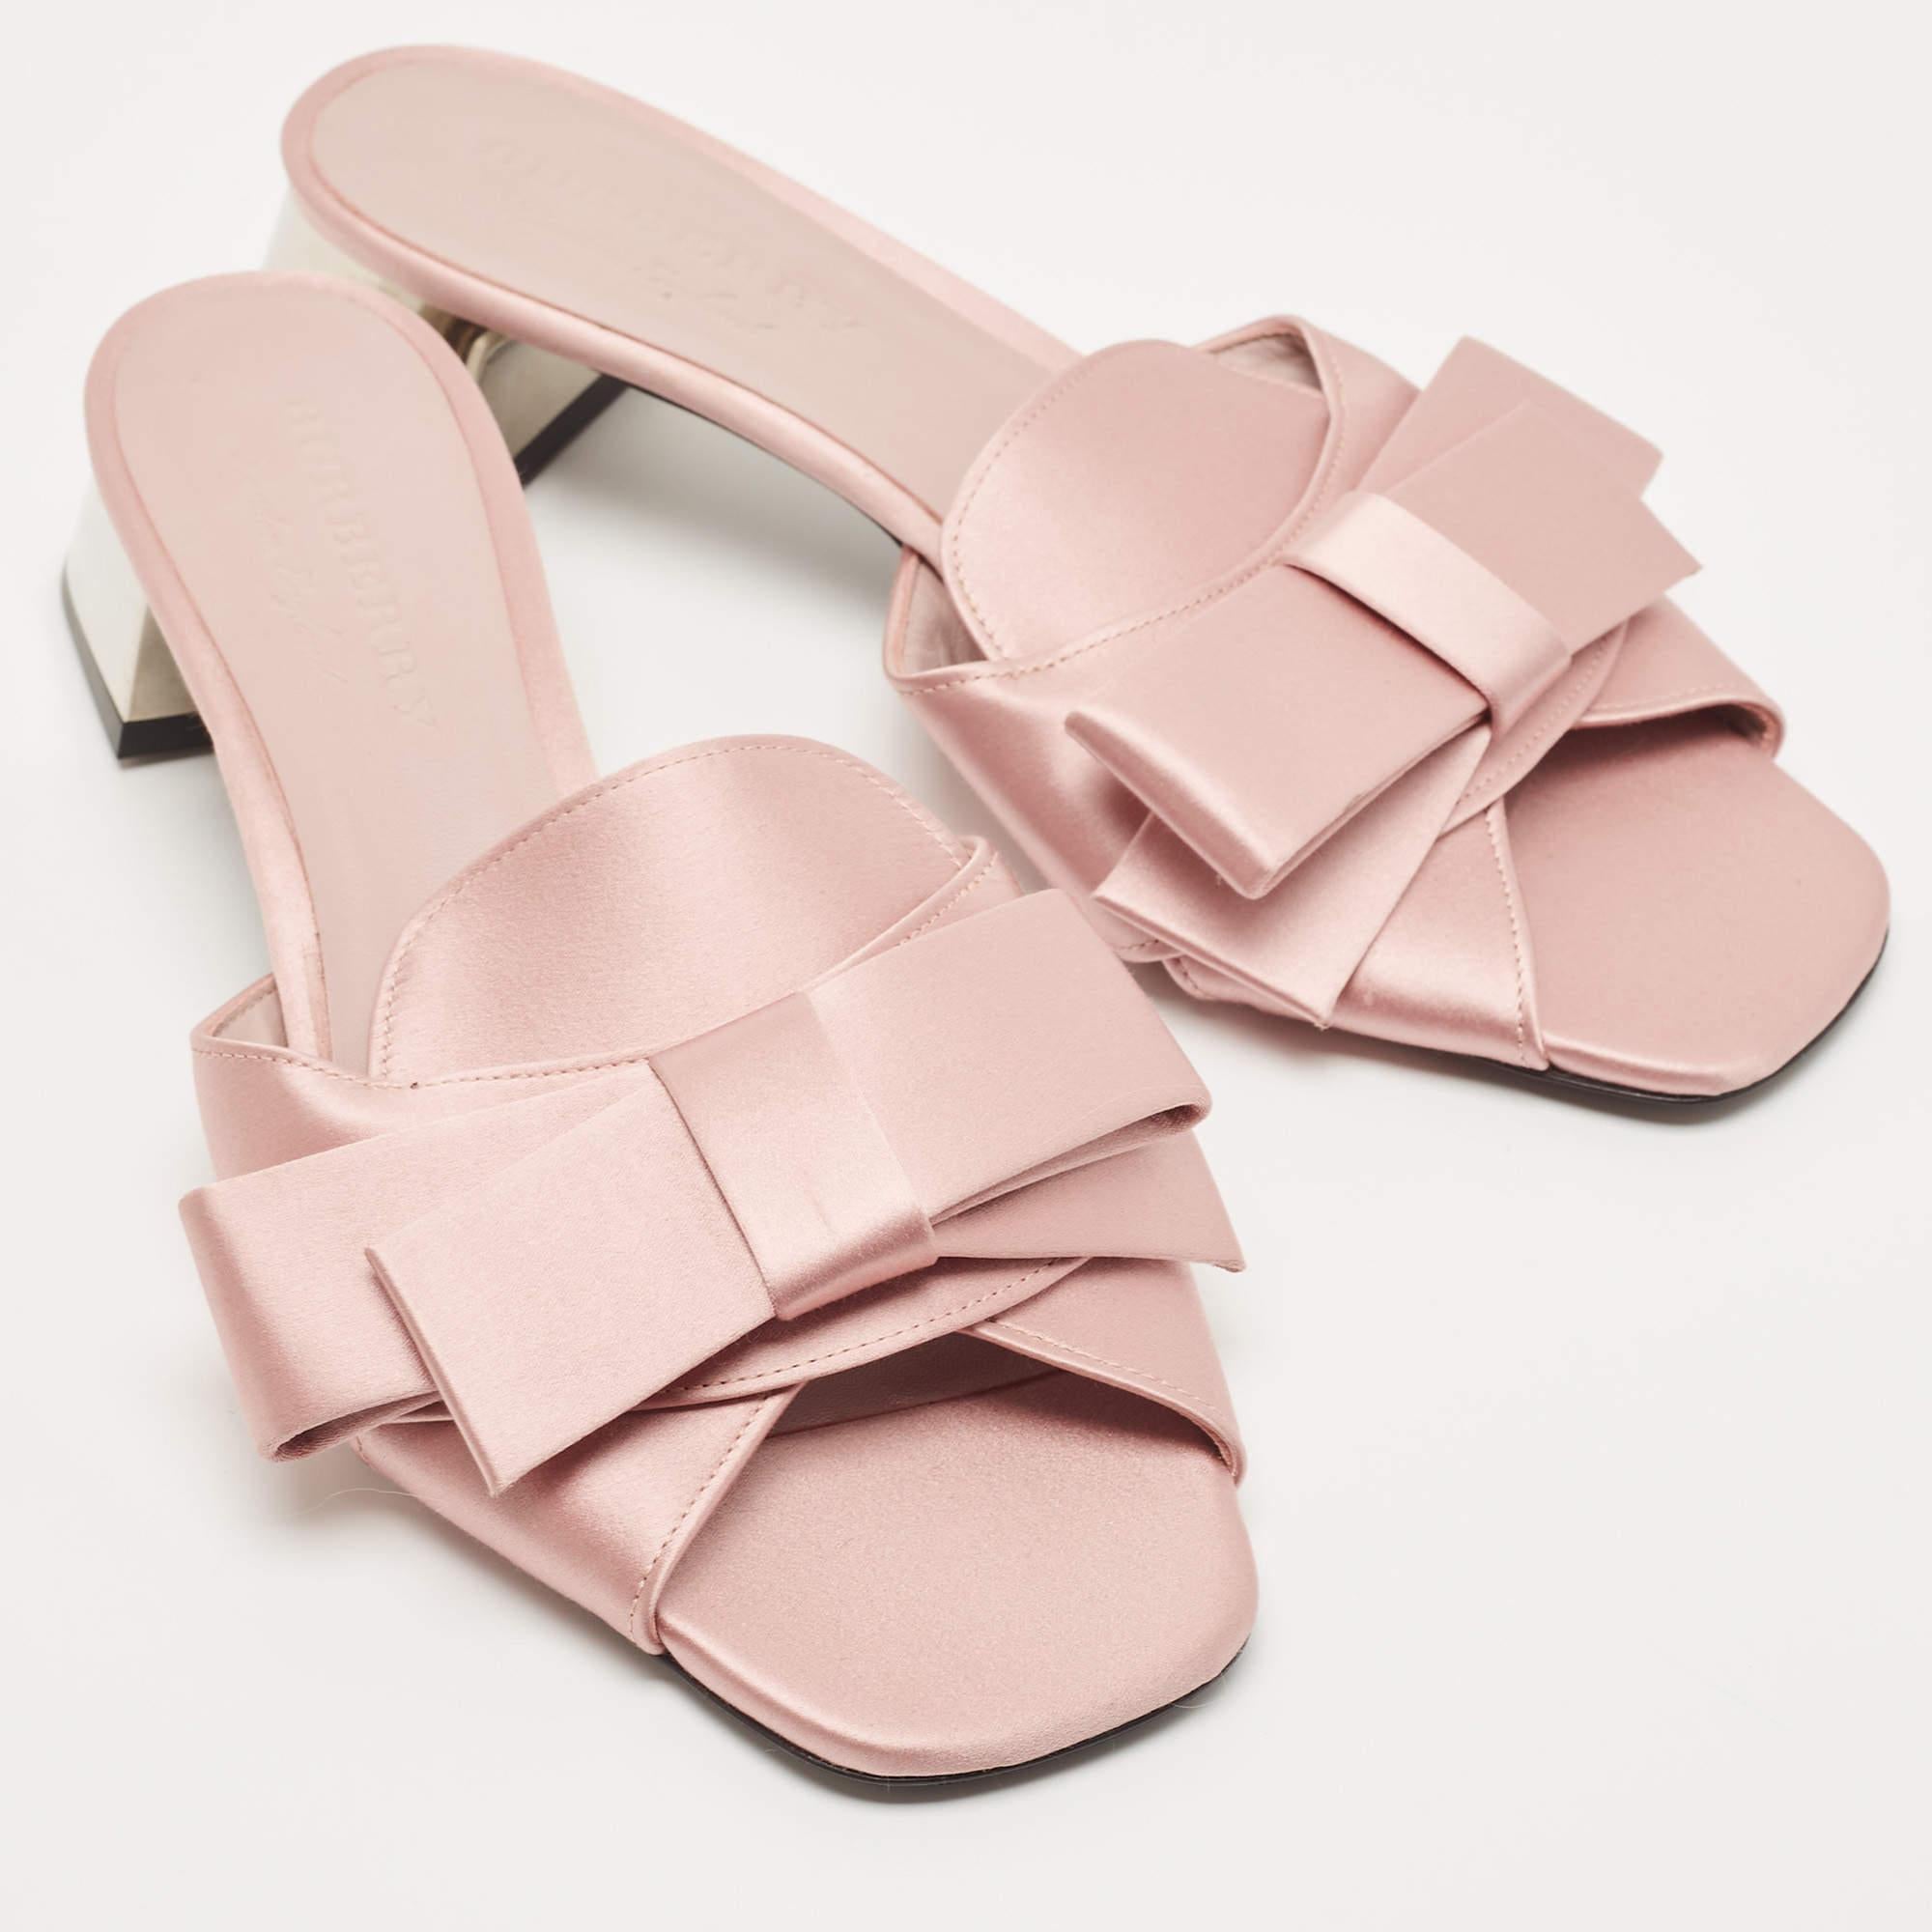 Burberry Pink Satin Bow Mules Size 41 1